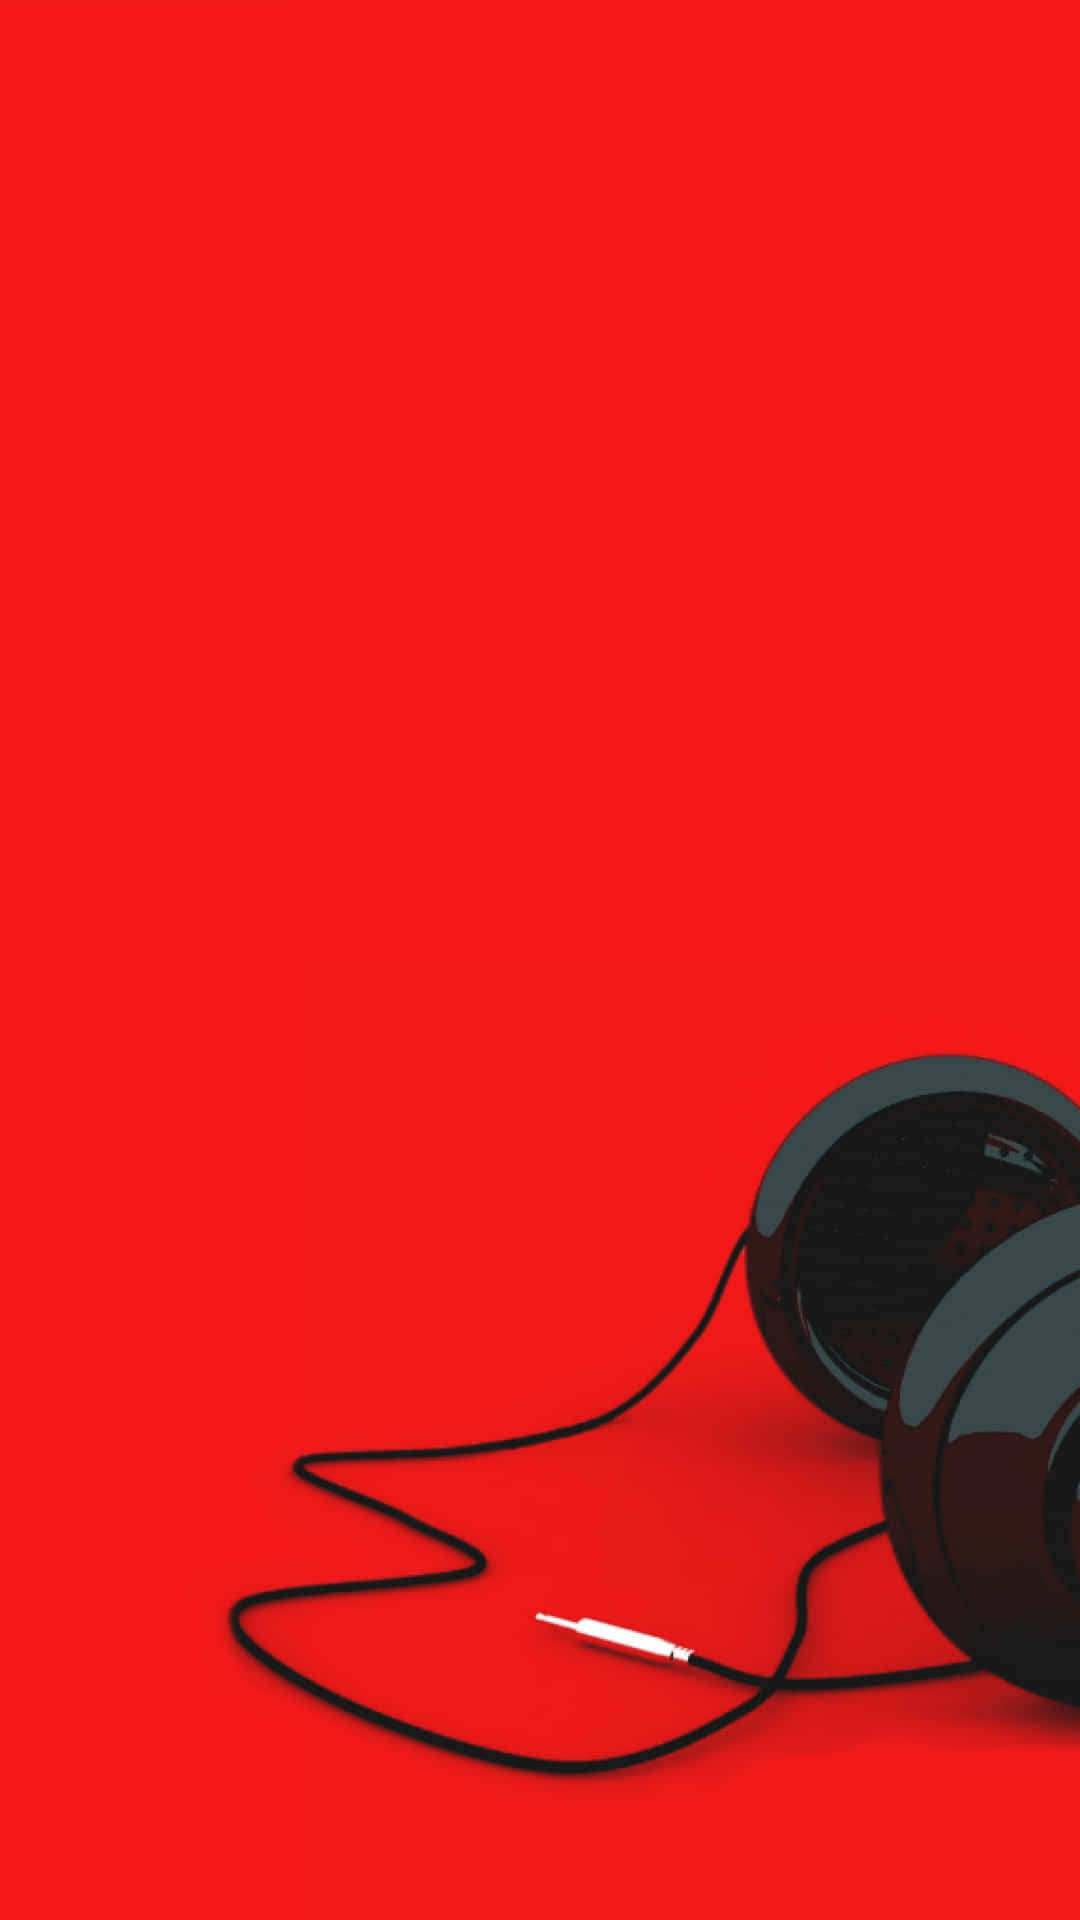 A Pair Of Headphones On A Red Background Wallpaper